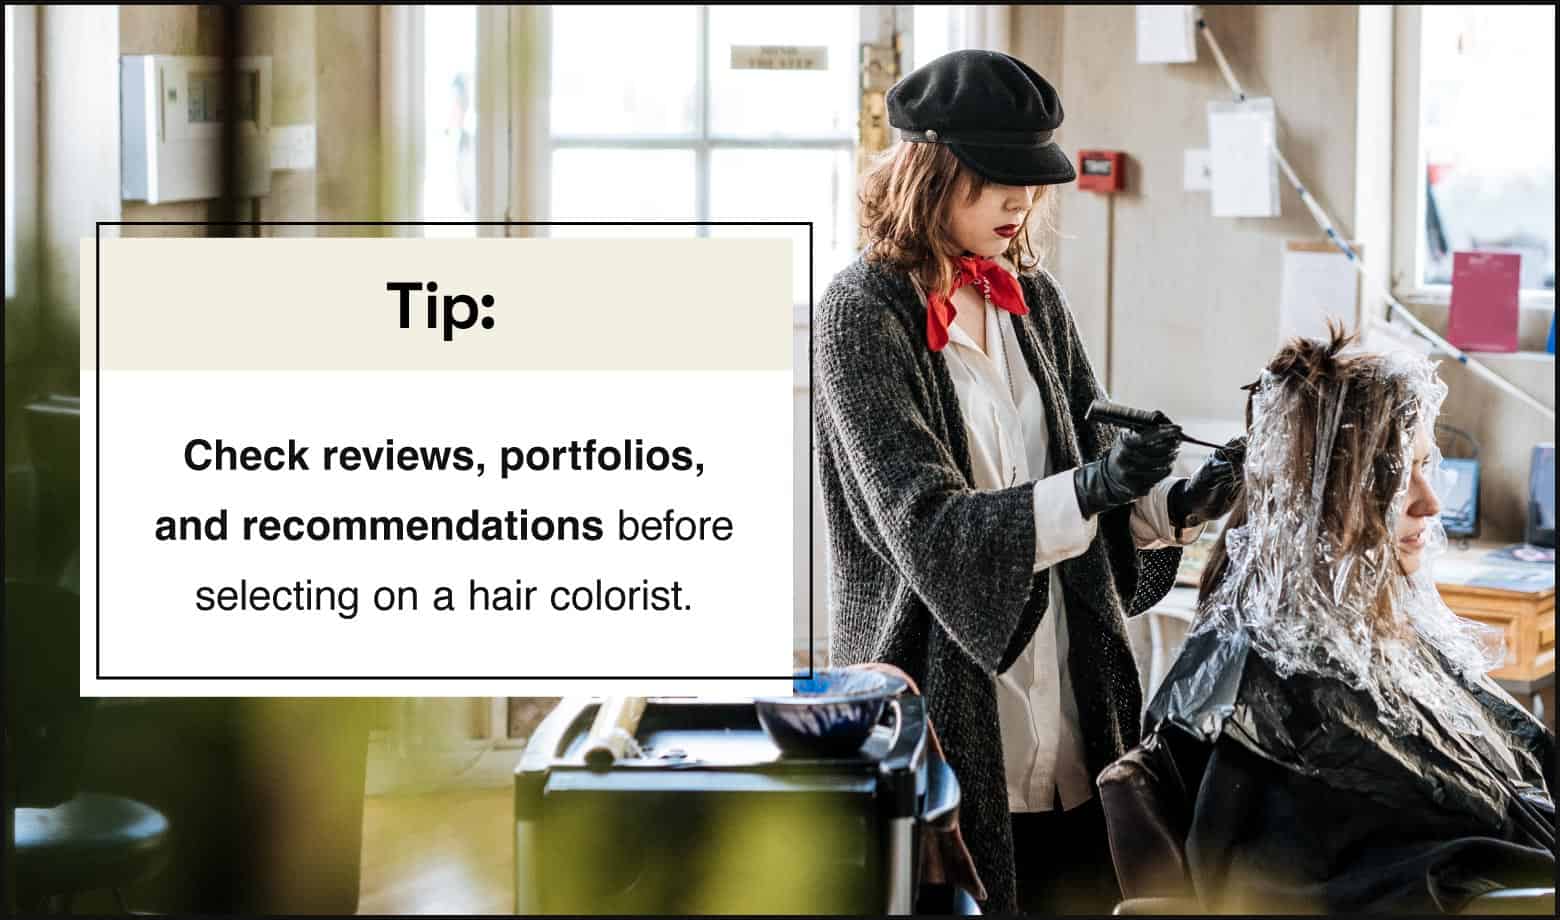 photo of stylist coloring a clients hair in the salon, copy overlay with tip saying to check reviews, portfolios, and recommendations before settling on a hair colorst